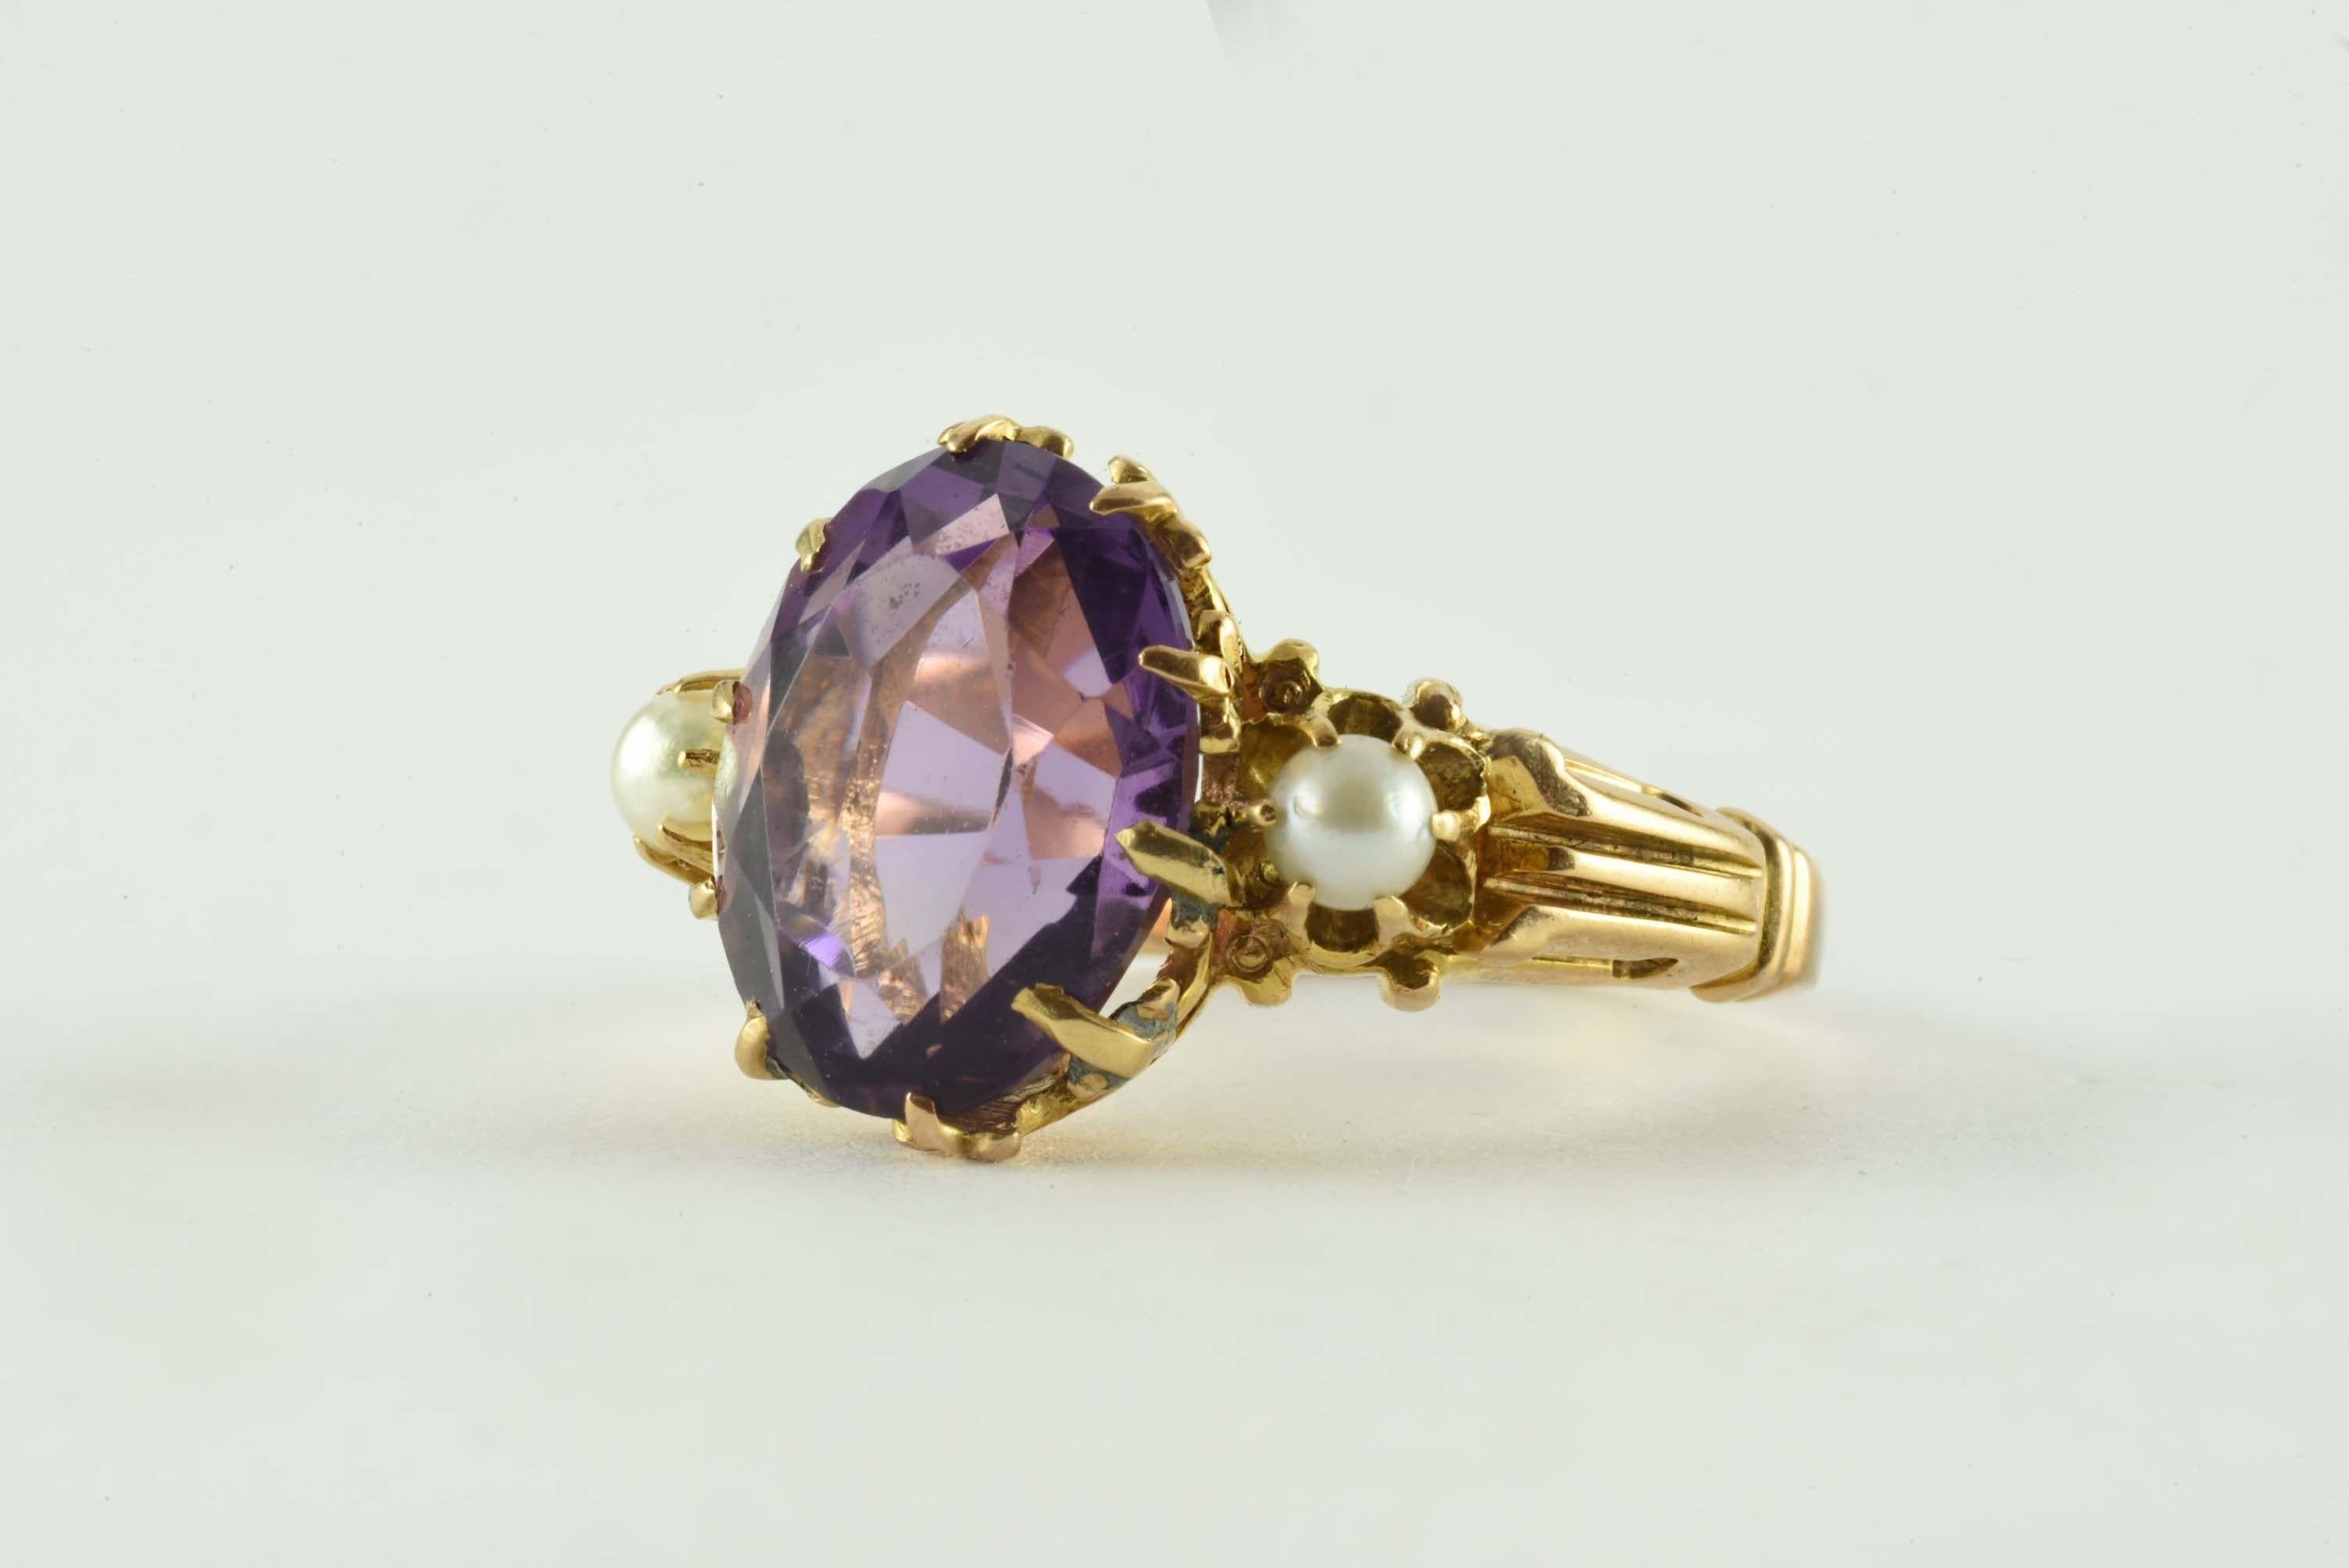 This antique Victorian oval-shaped amethyst center stone measuring 9.7 x 10.11mm is flanked by two 3mm seed pearls and set in 14kt yellow gold. 
